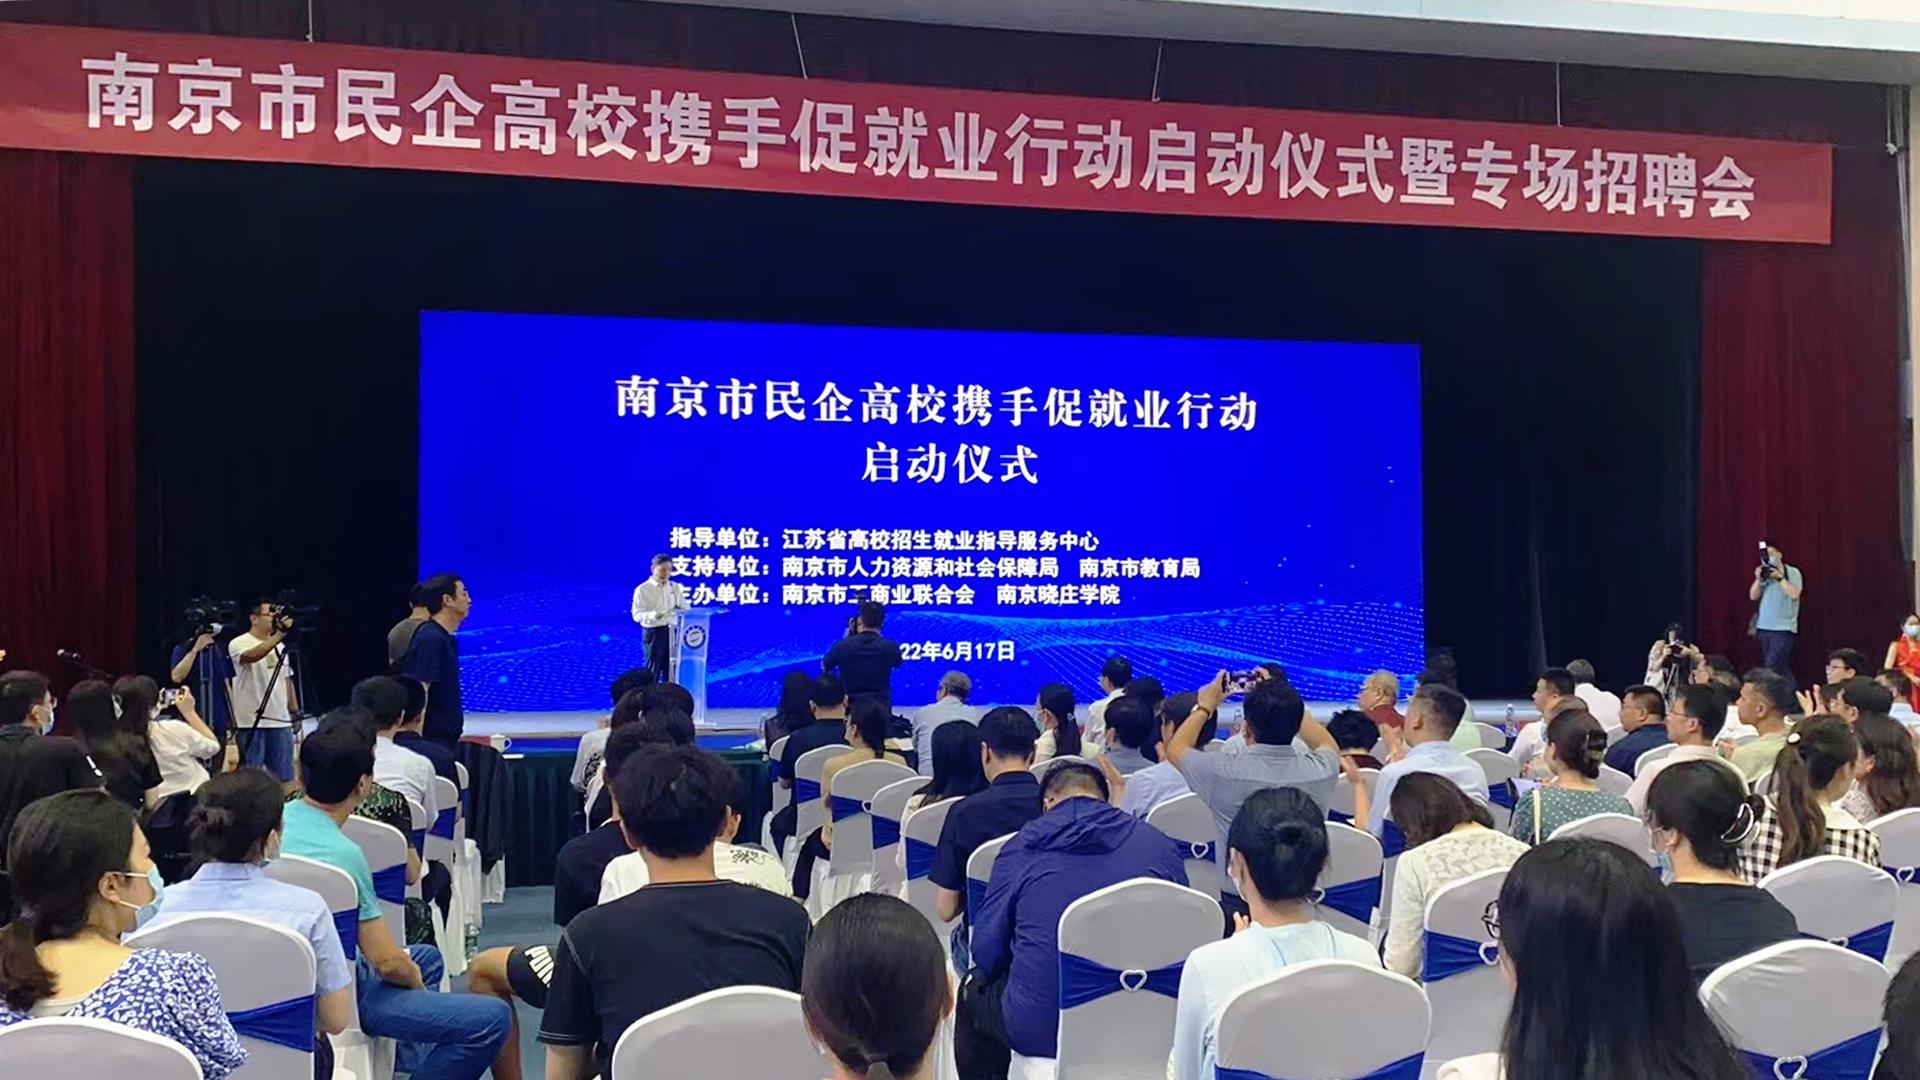 Special job fair - KJT was invited to attend the "Launching Ceremony of the Nanjing Citizen-Enterprises and Universities Join Hands to Promote Employment Action"